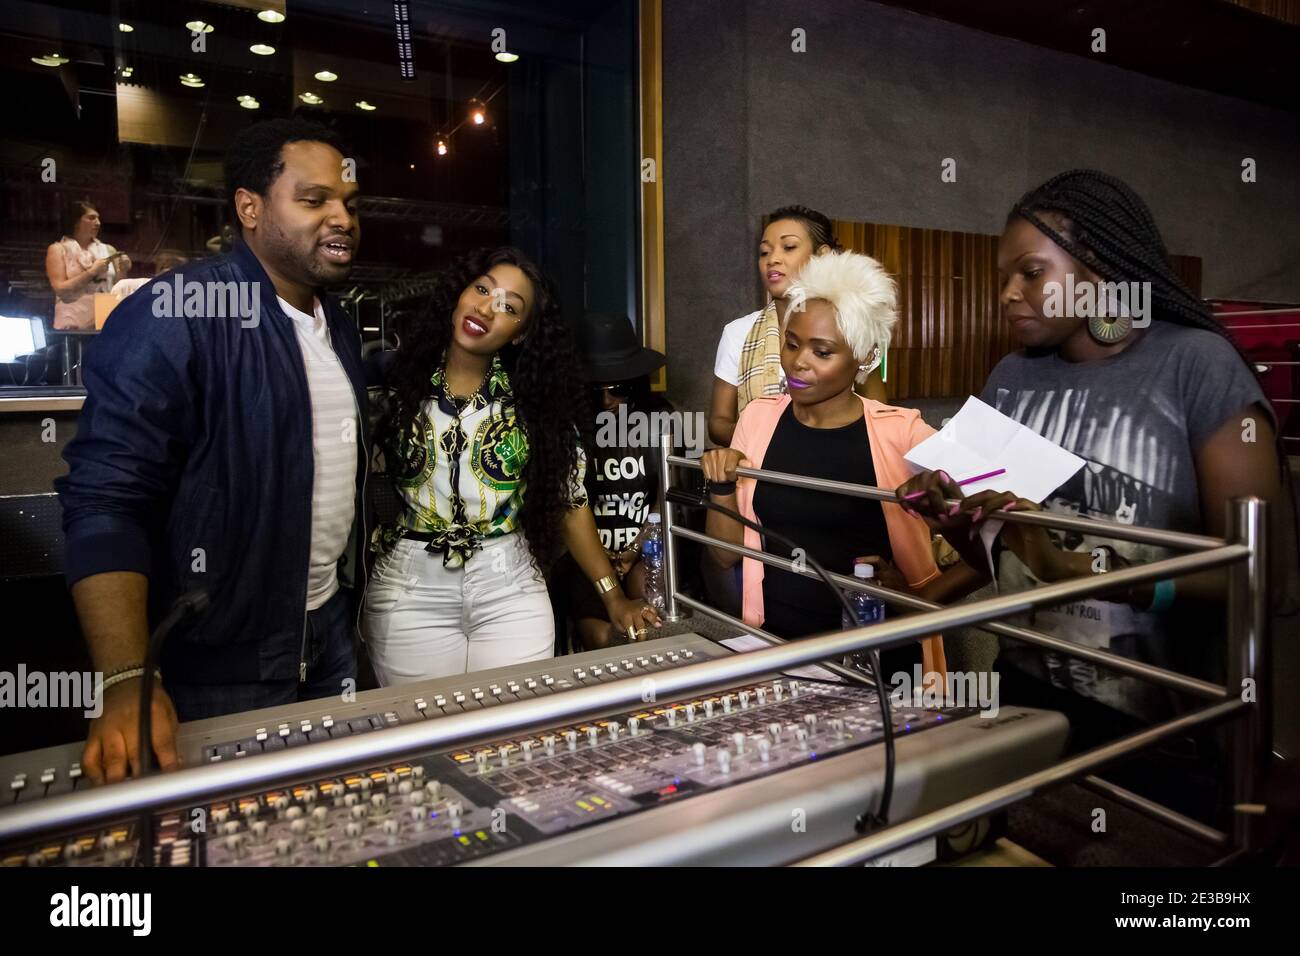 Johannesburg, South Africa - April 28, 2015: Nigerian Music producer Cobhams Asuquo working in studio with African artists Stock Photo